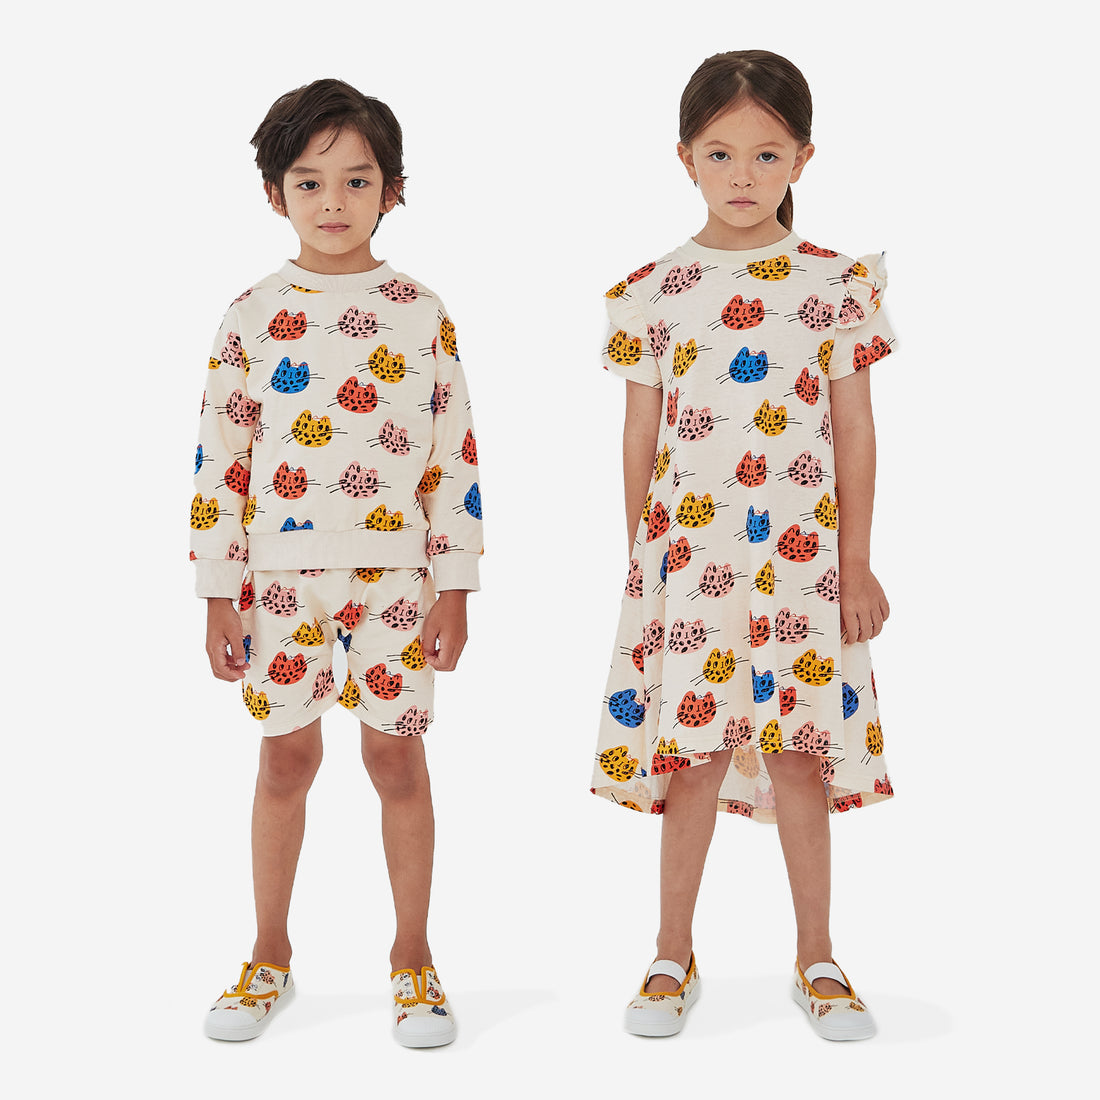 The multi cat print boy short has a cream background with abstract multi color cat faces and elastic belt